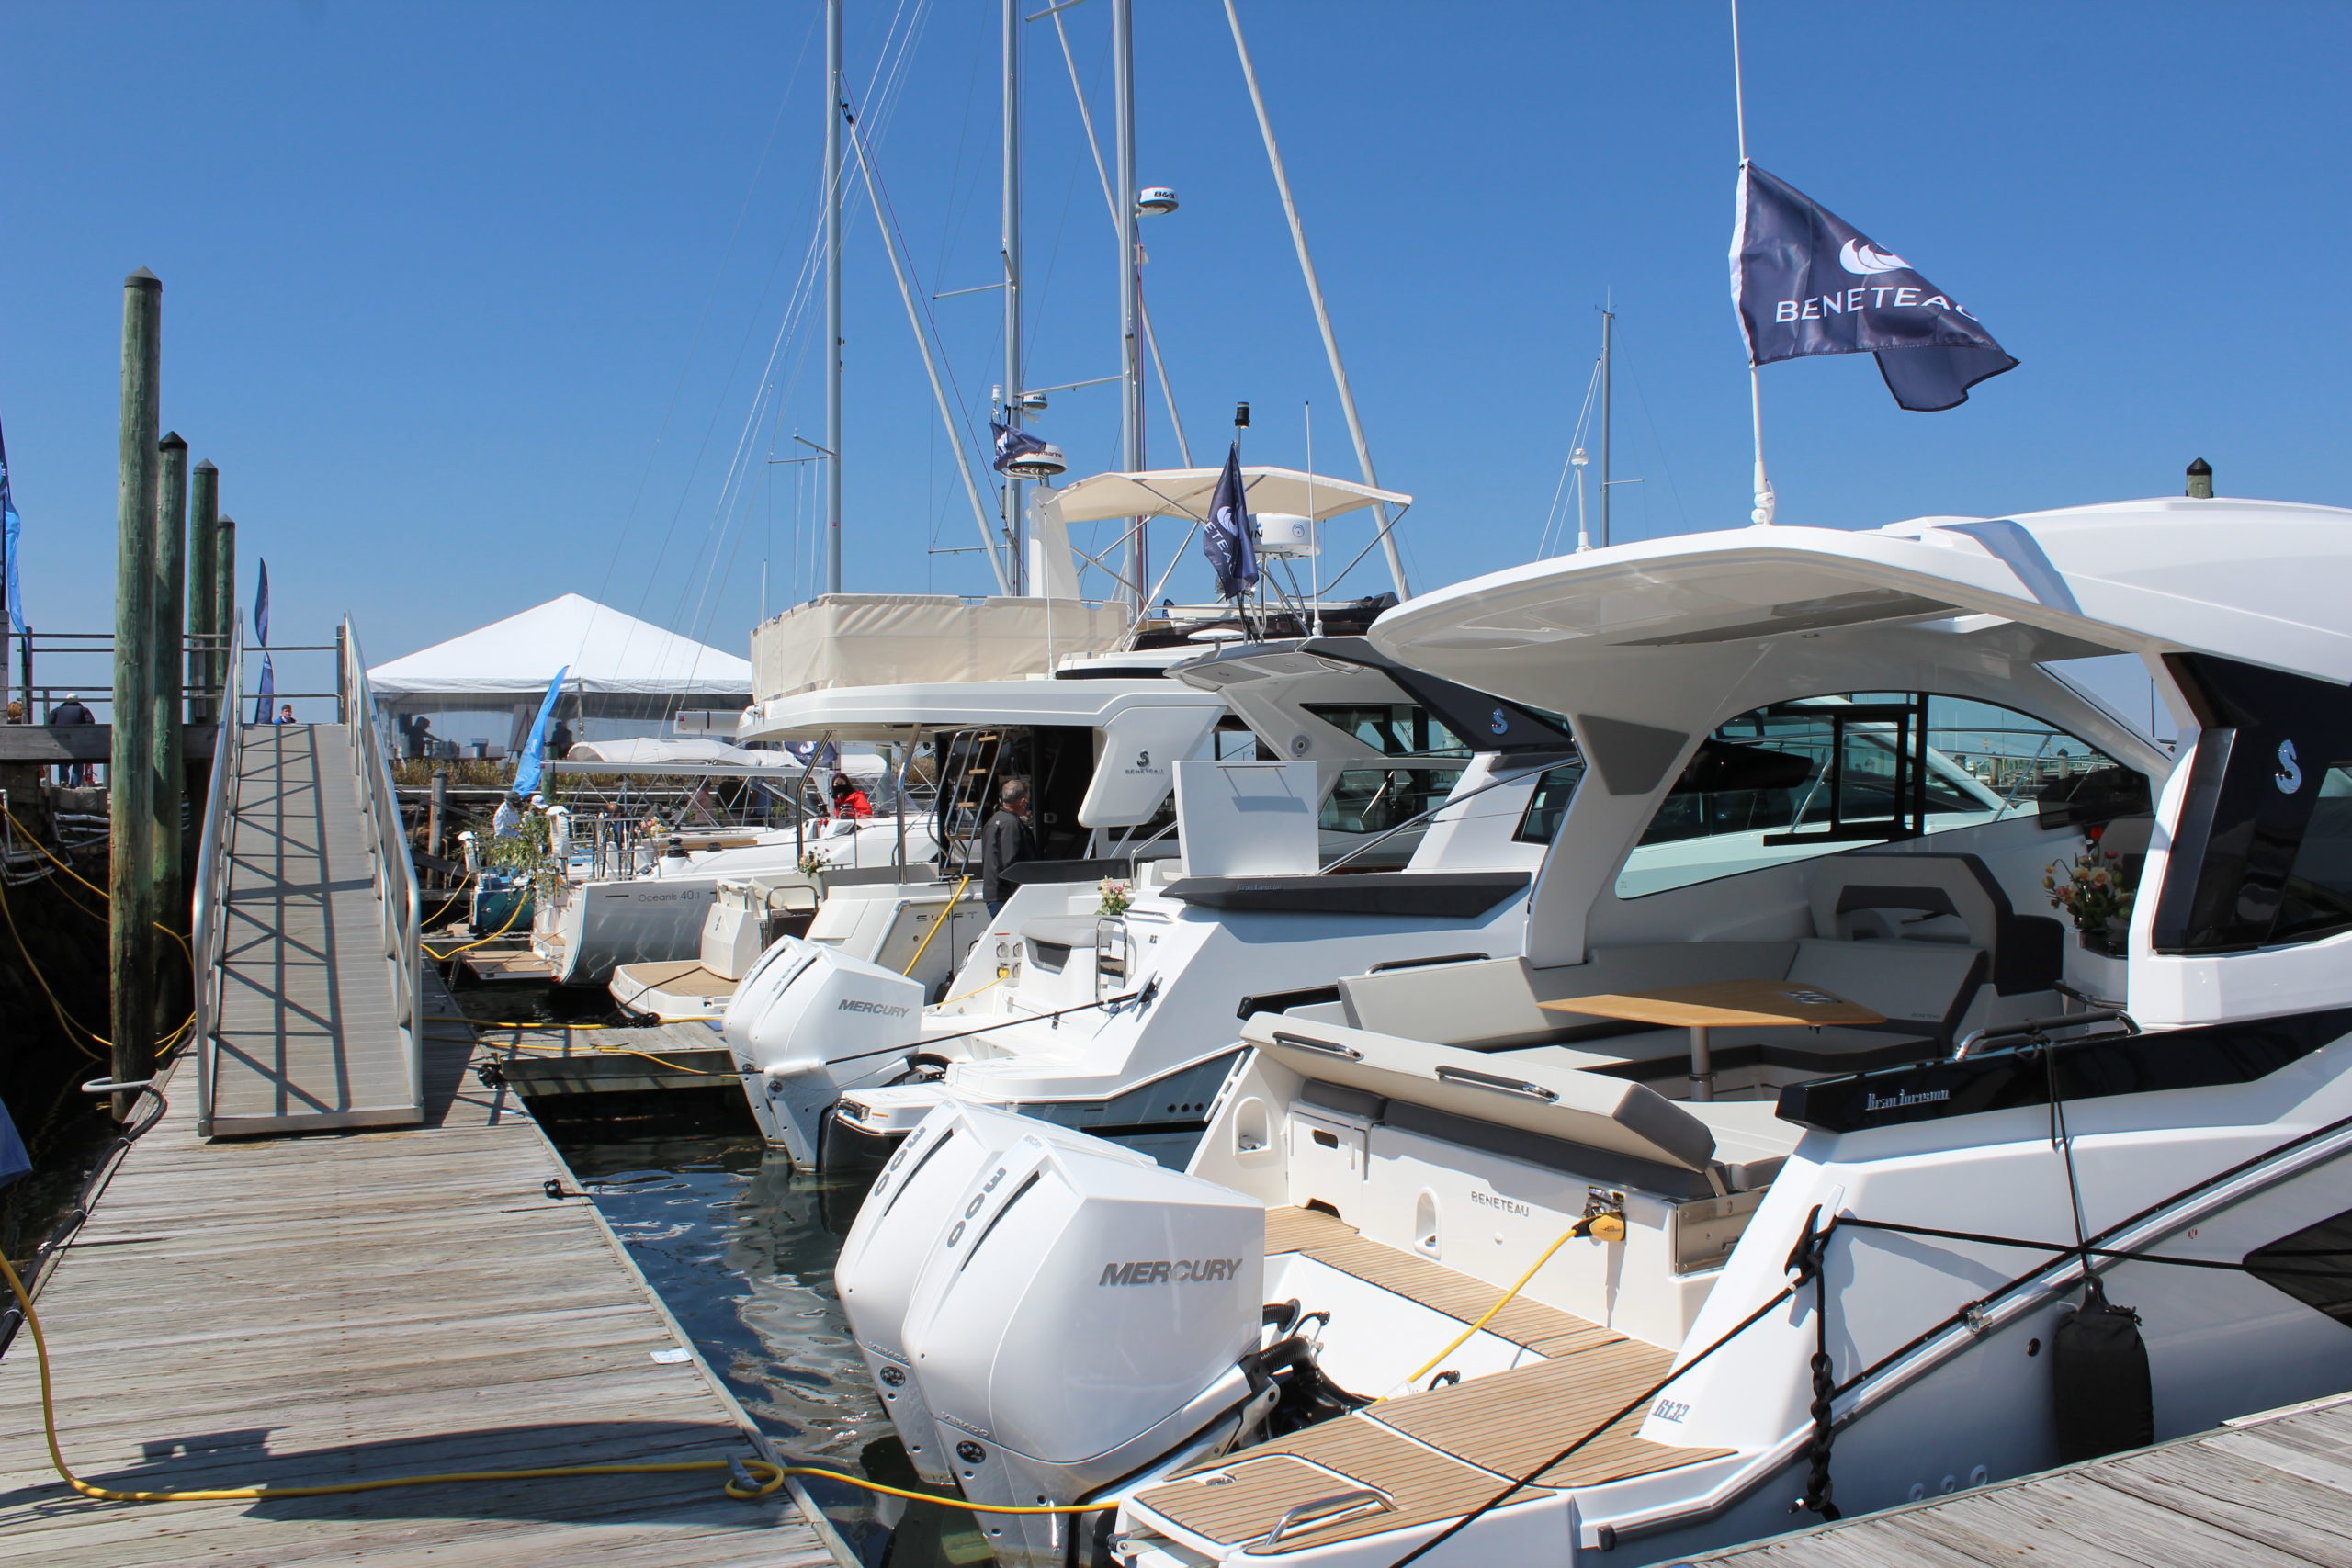 BENETEAU by Invitation Event